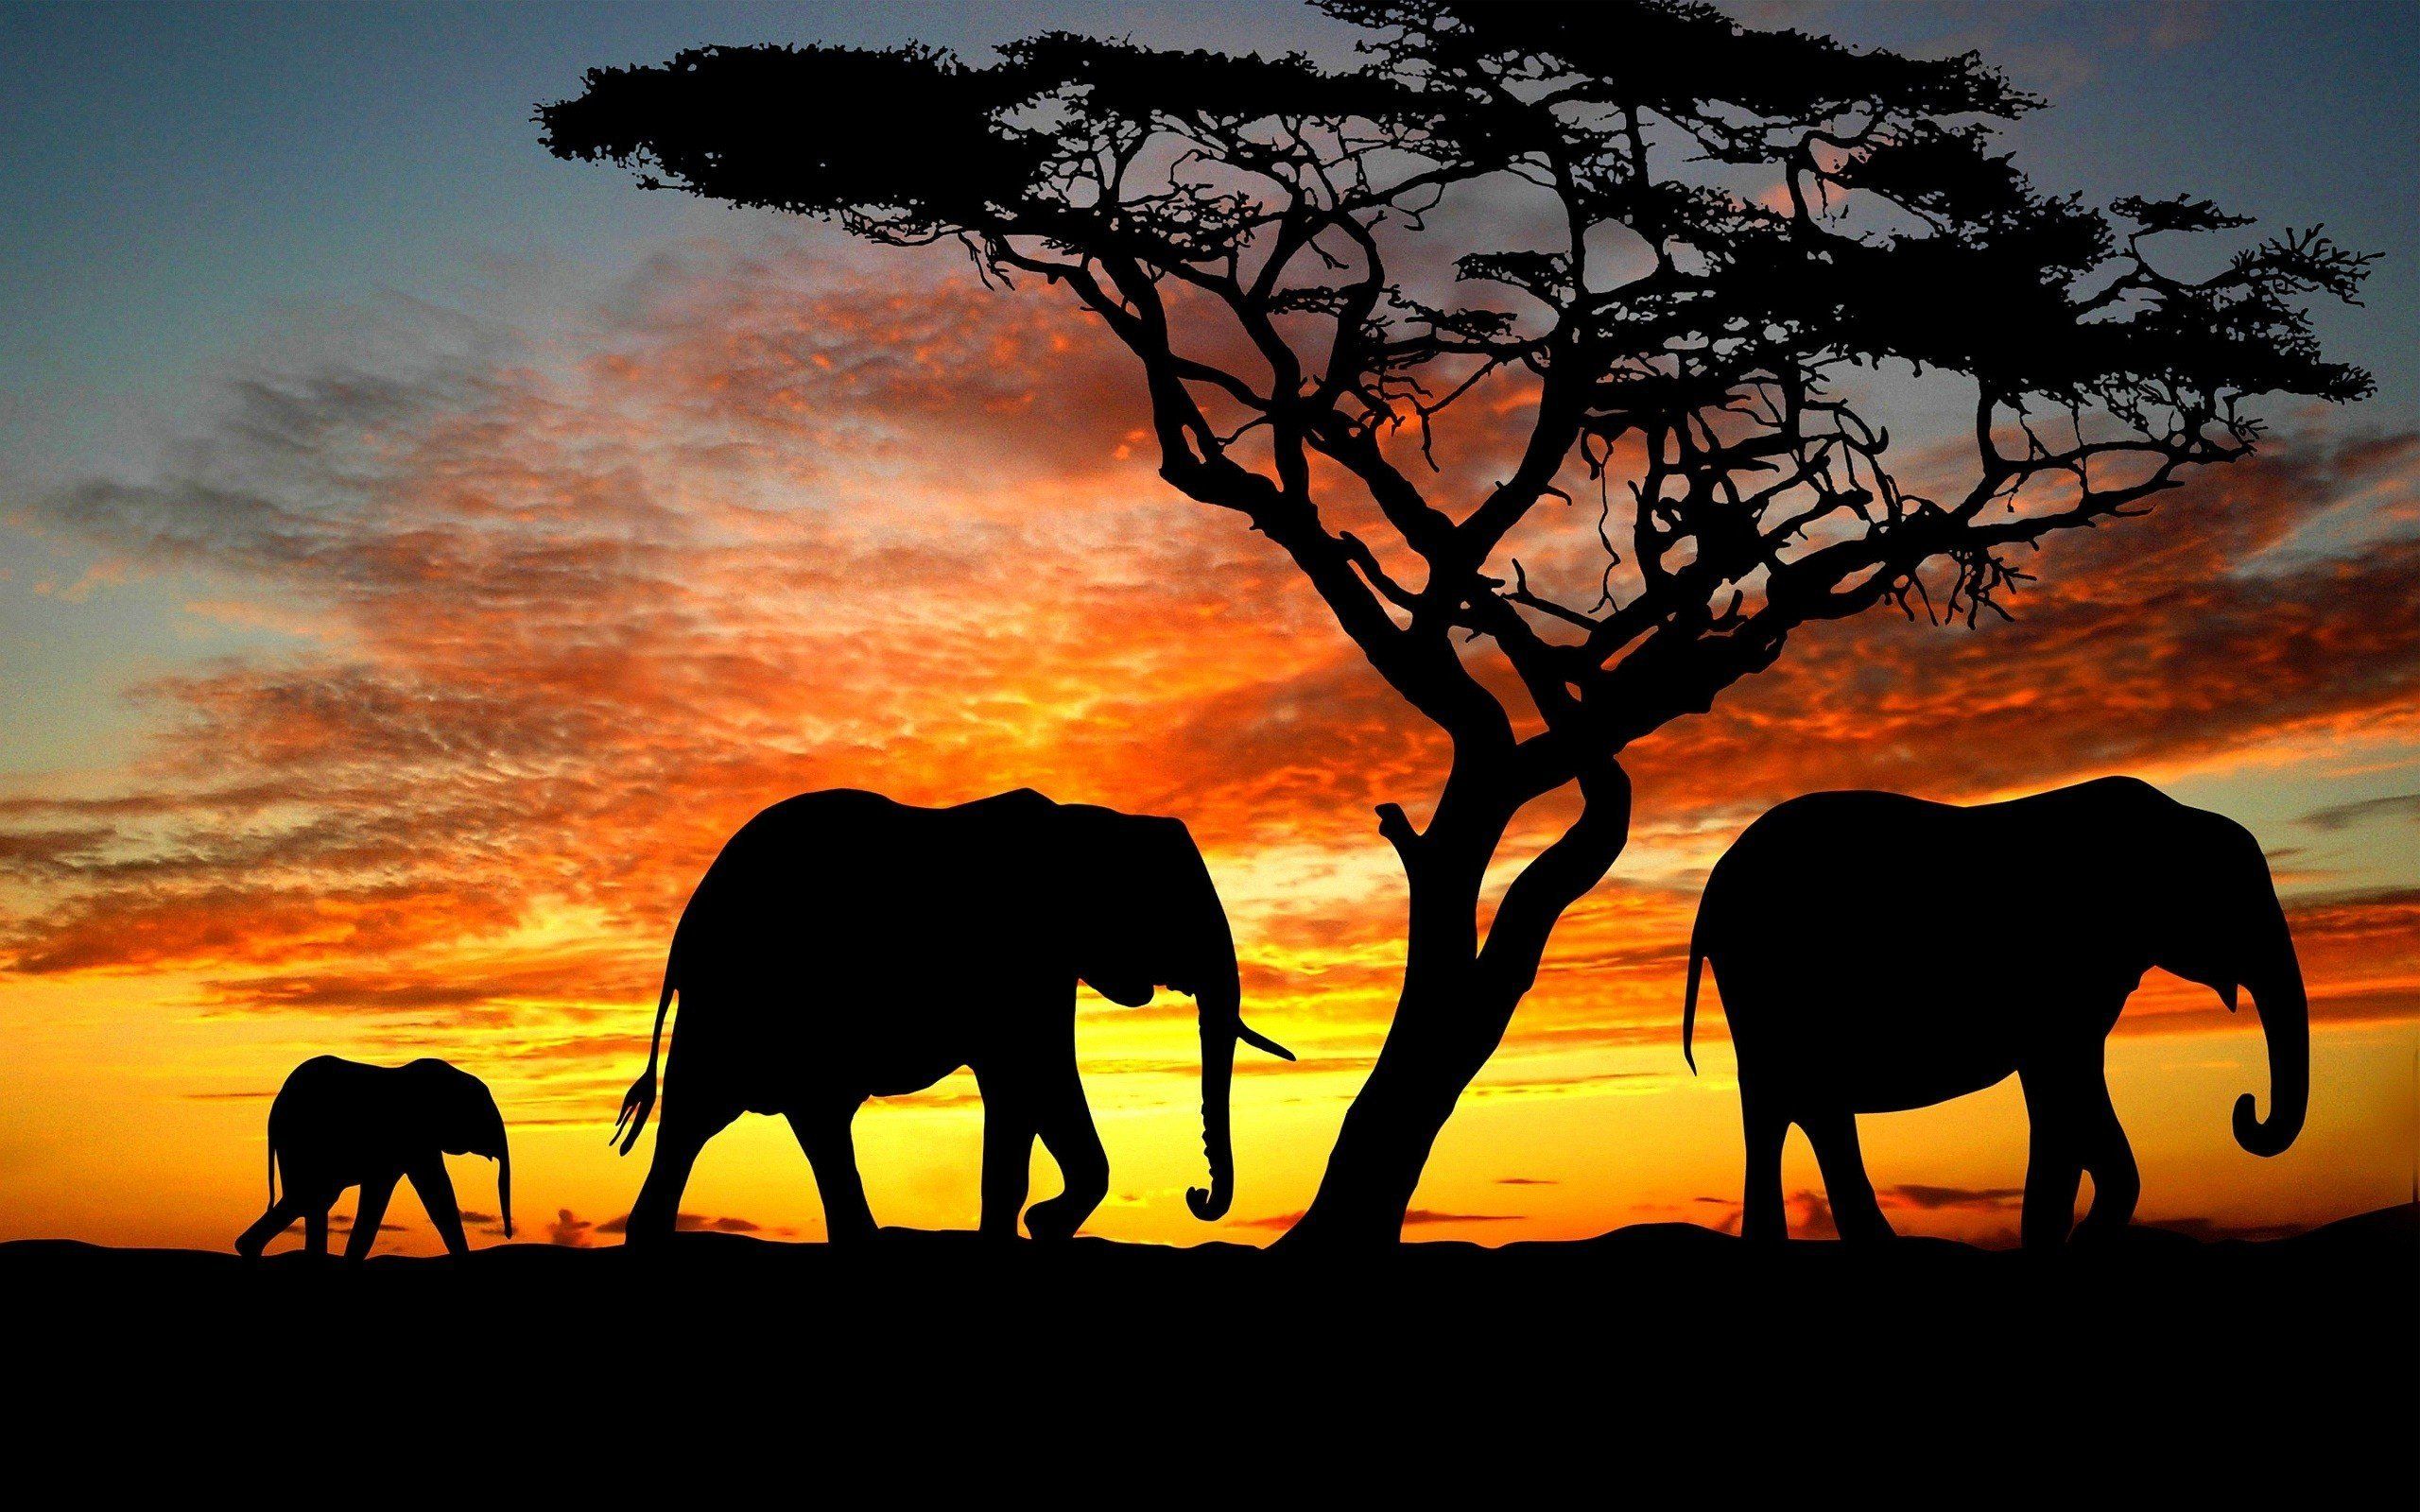 A family of three elephants walking under a tree during sunset. - Elephant